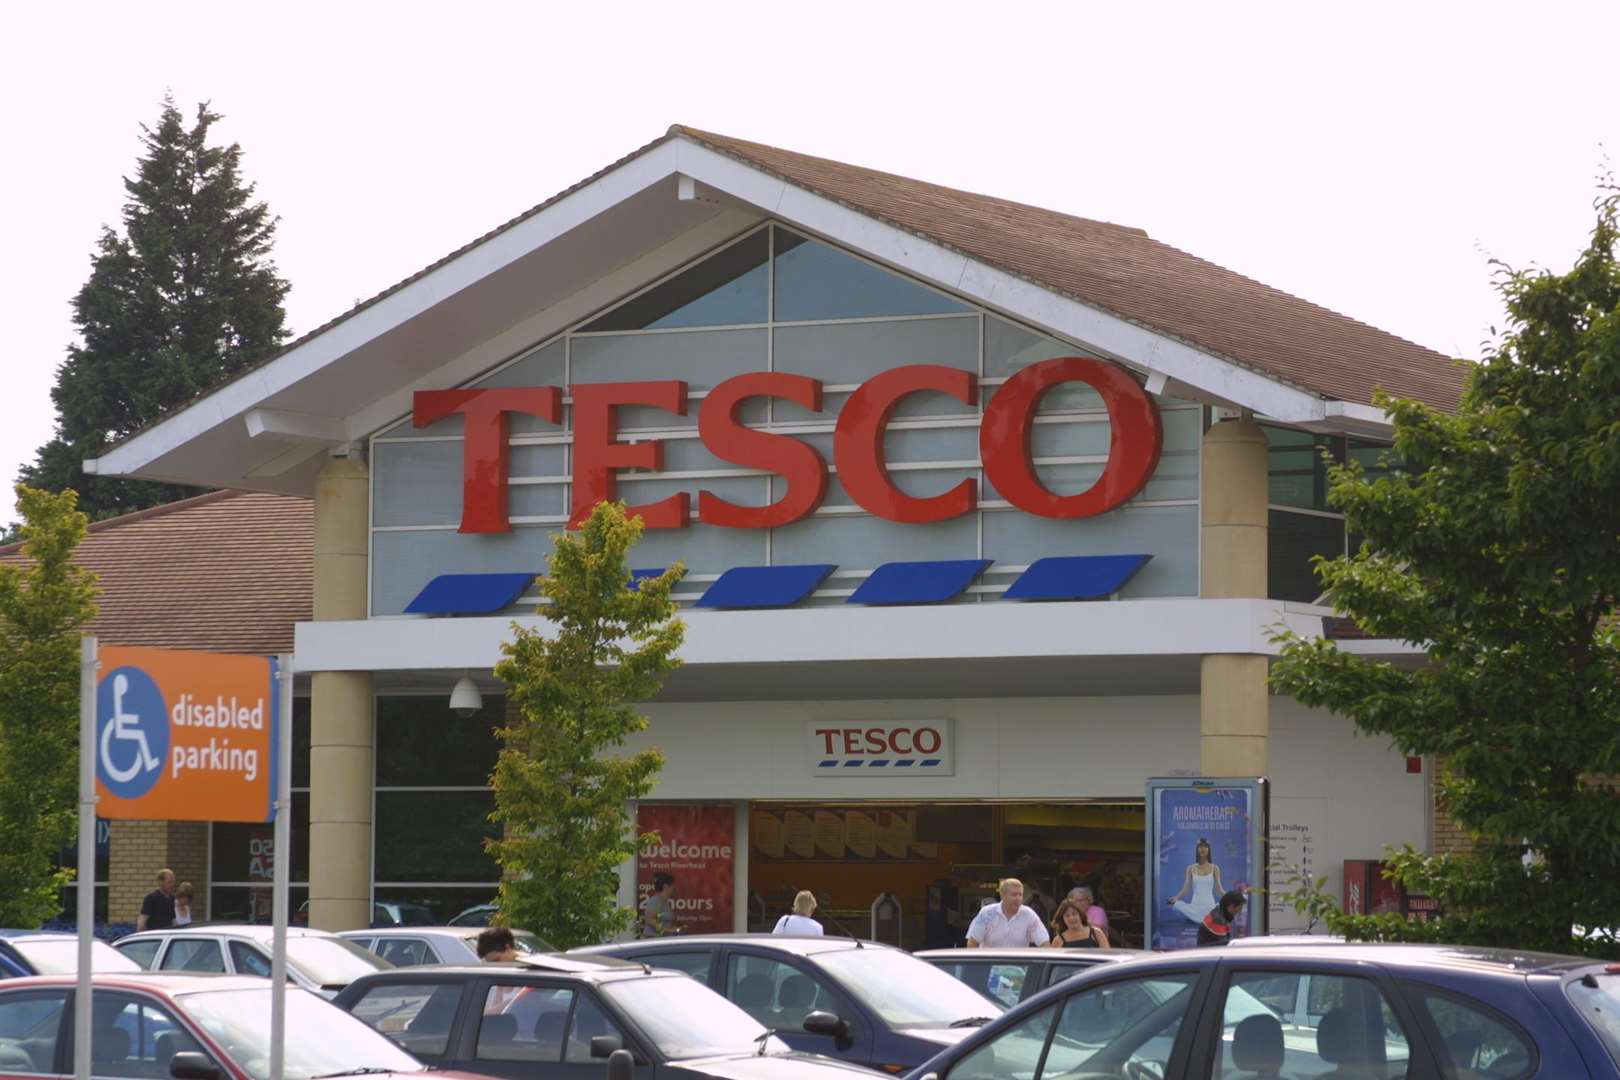 The Tesco Supermarket at Riverhead could be set for an expansion...........................picture by John Westhrop (4300834)